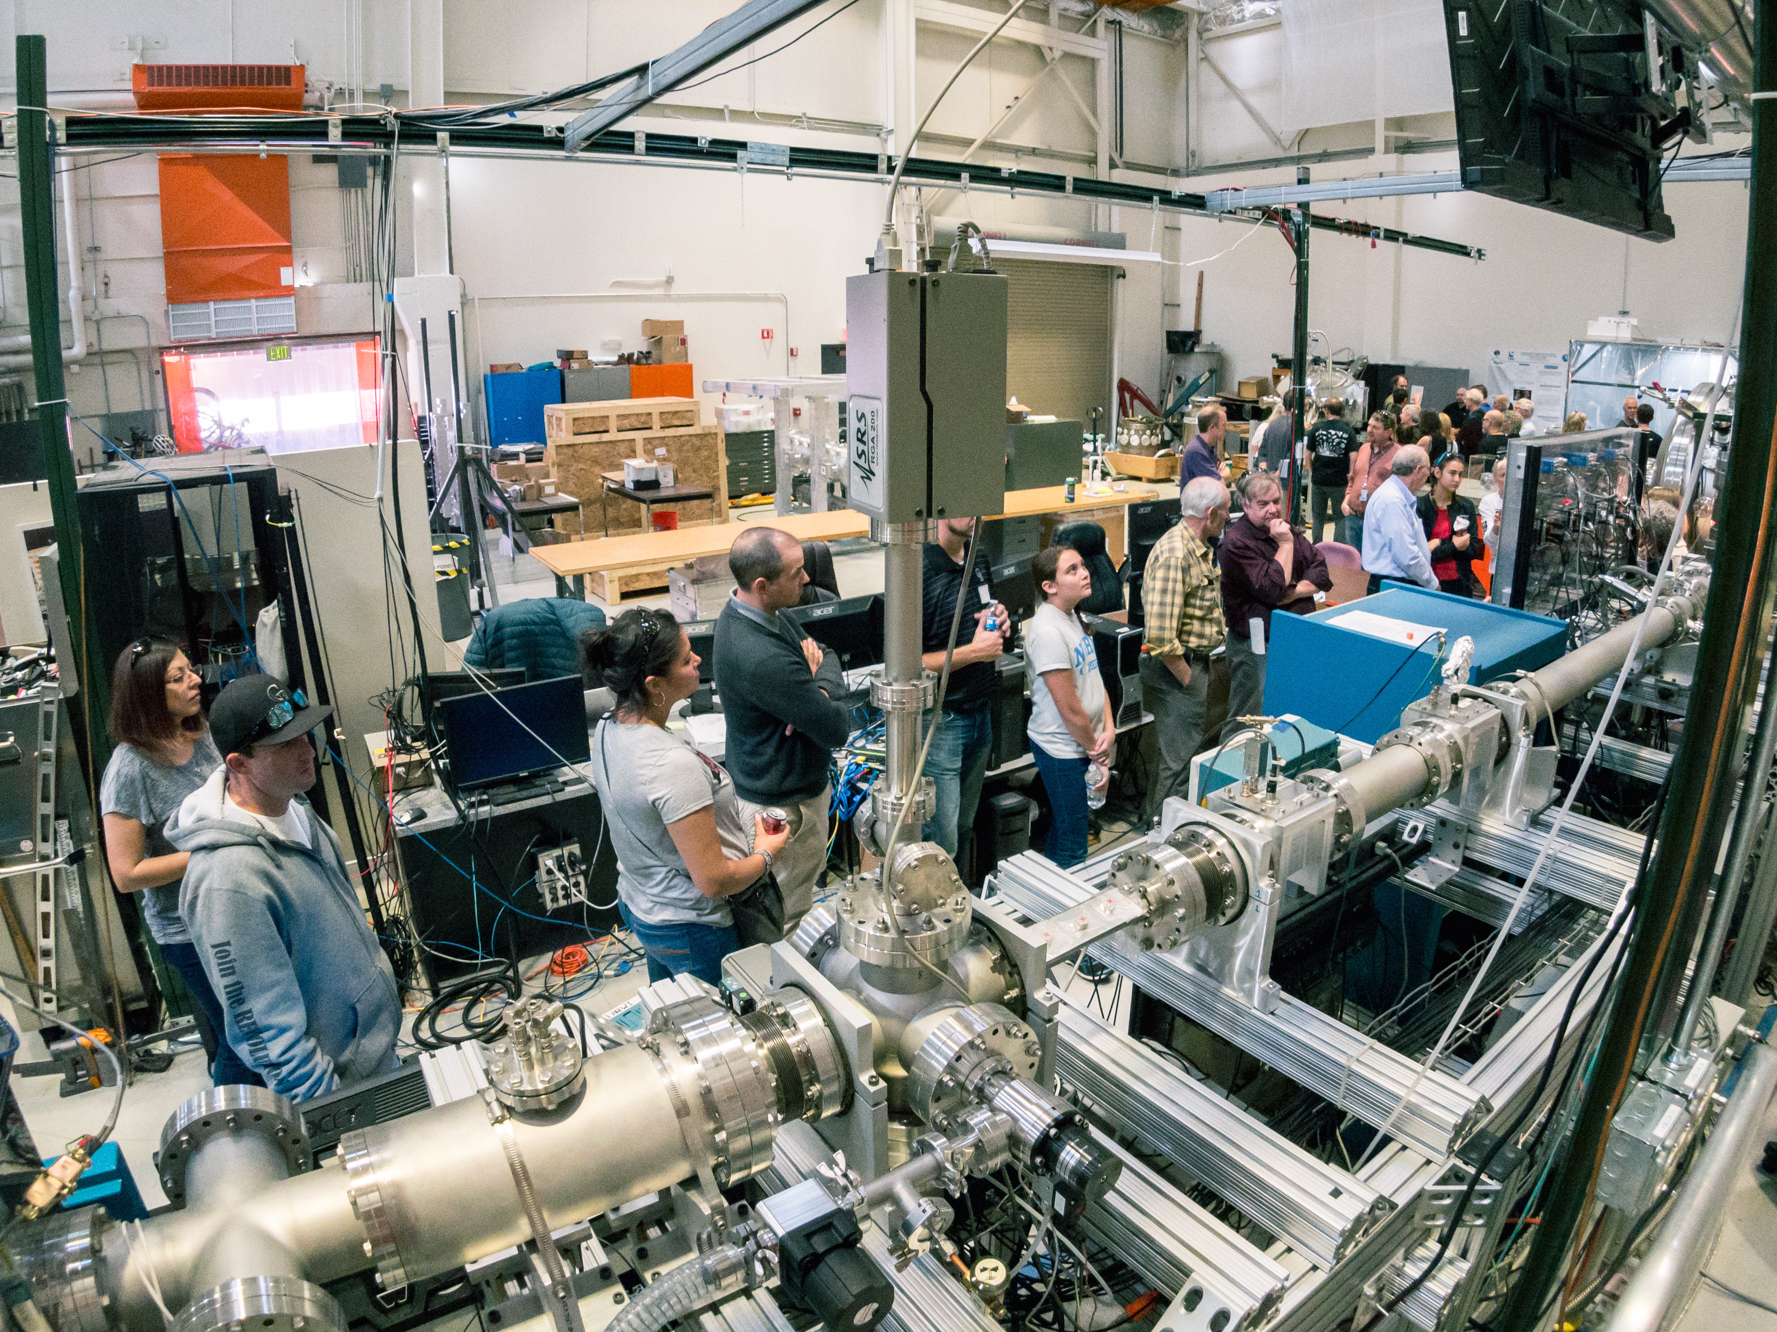 Open house of the IMPACT dust accelerator facilities